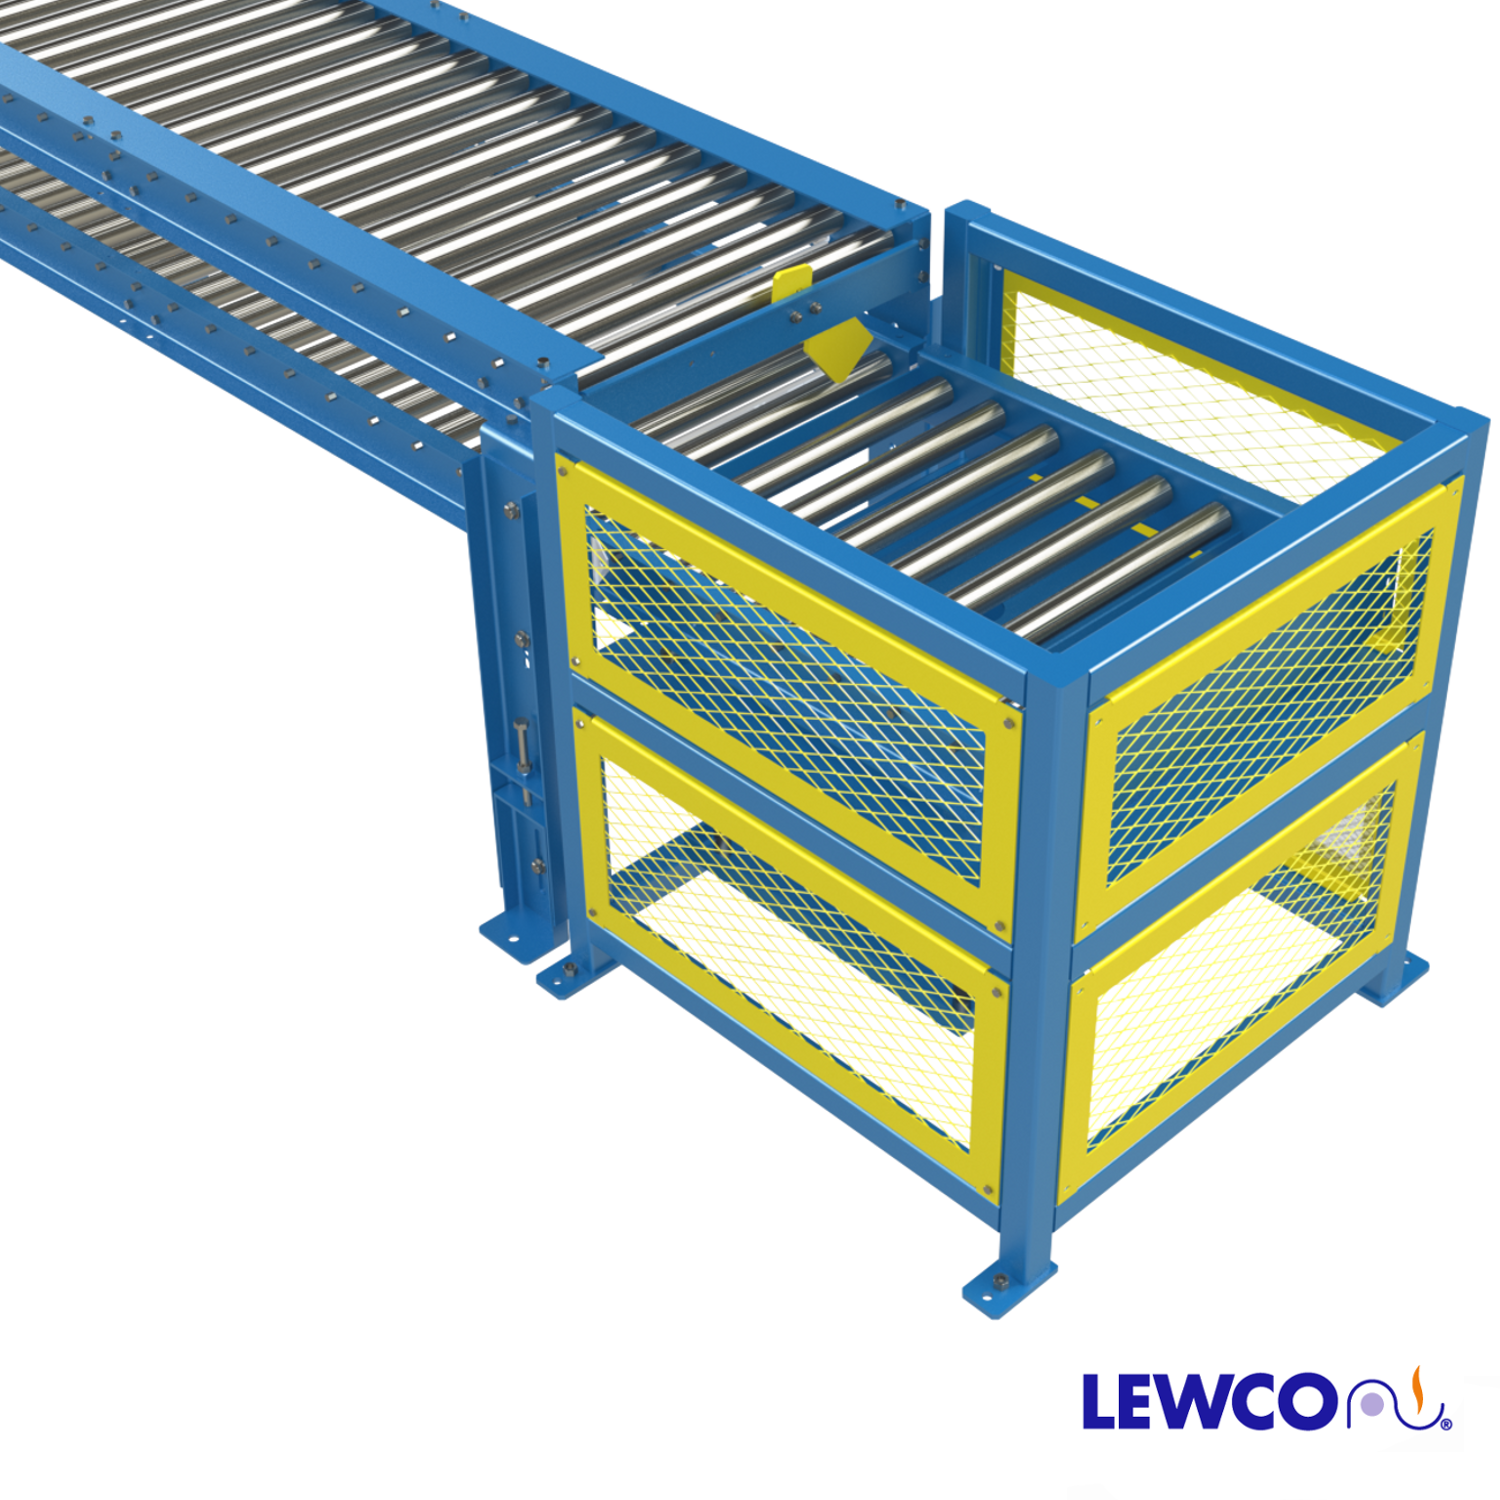 Conveyor Blade Stop with Mechanical Lift Actuation Device - Lewco Conveyors